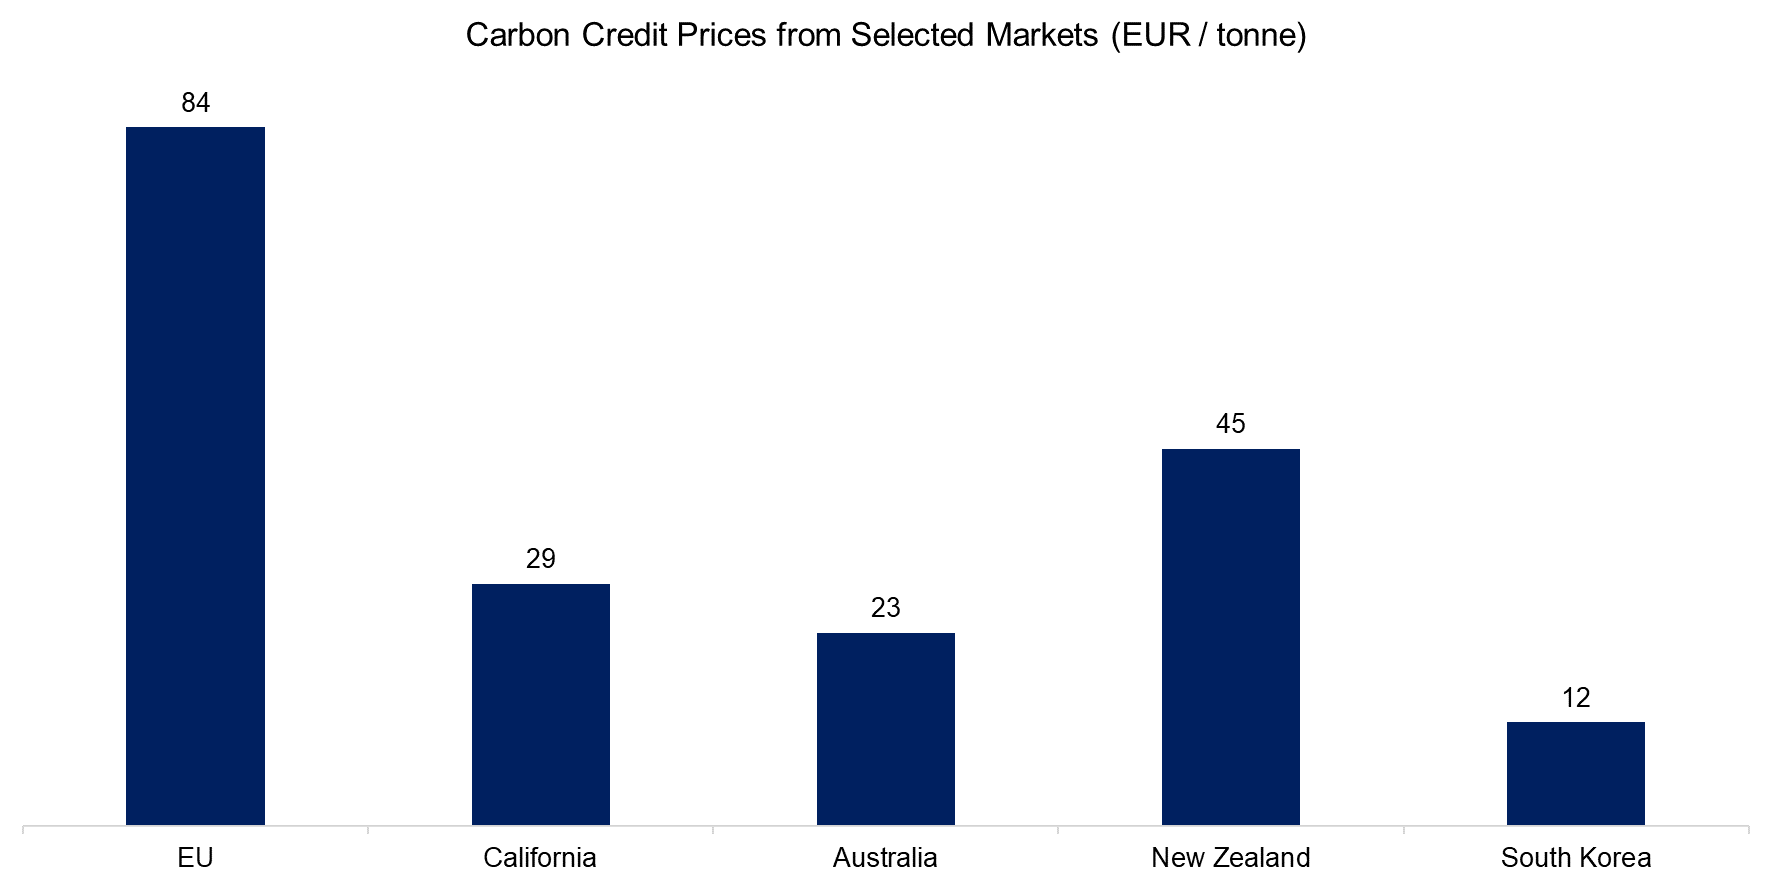 Carbon Credit Prices from Selected Markets (EUR tonne)